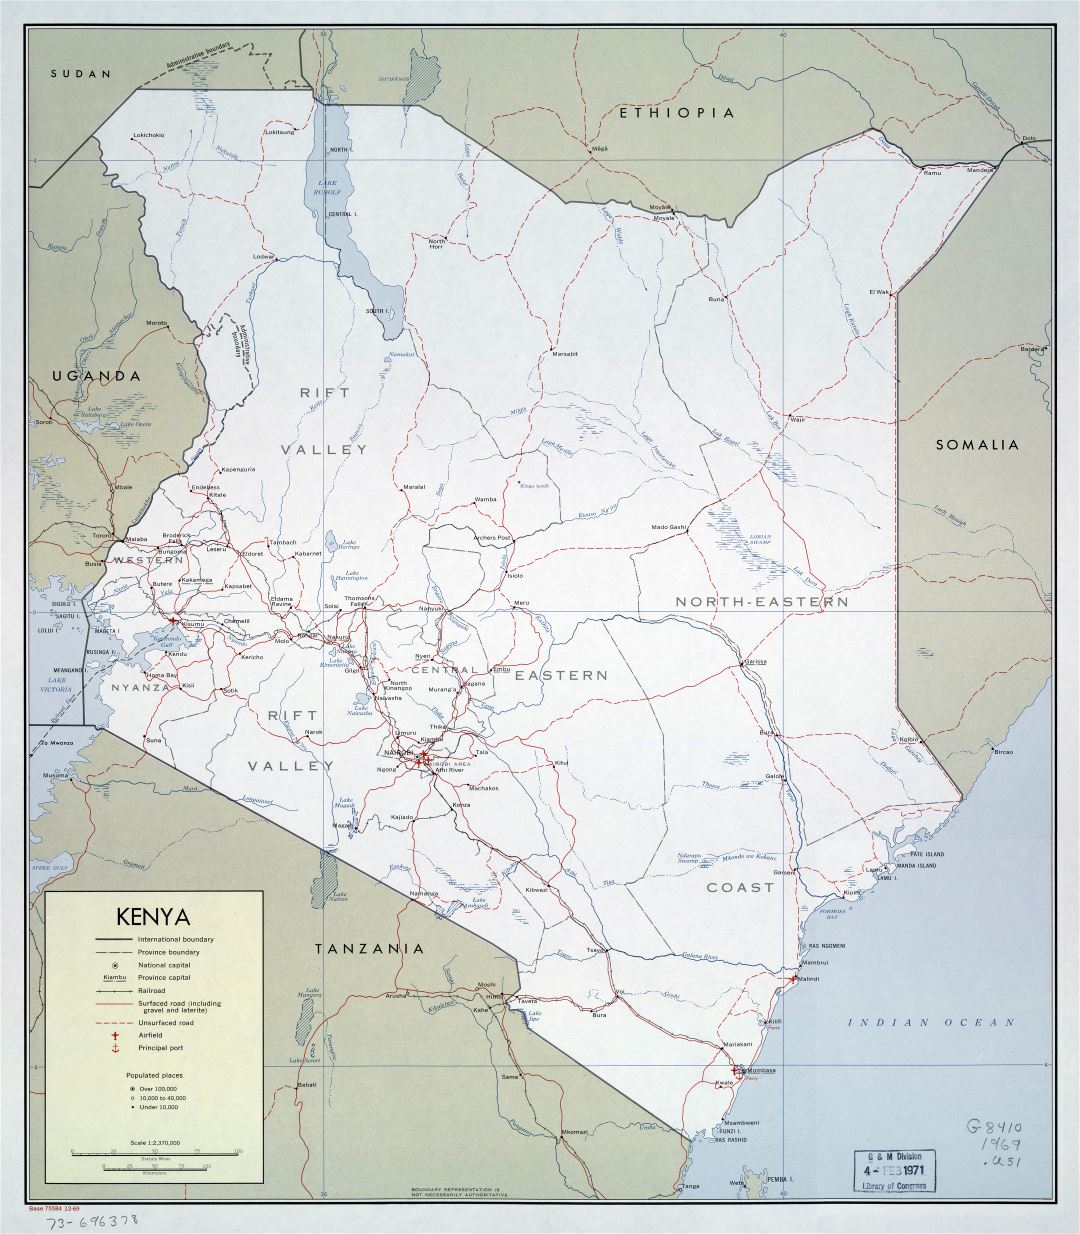 Large scale political and administrative map of Kenya with roads, railroads, cities, ports and airports - 1969